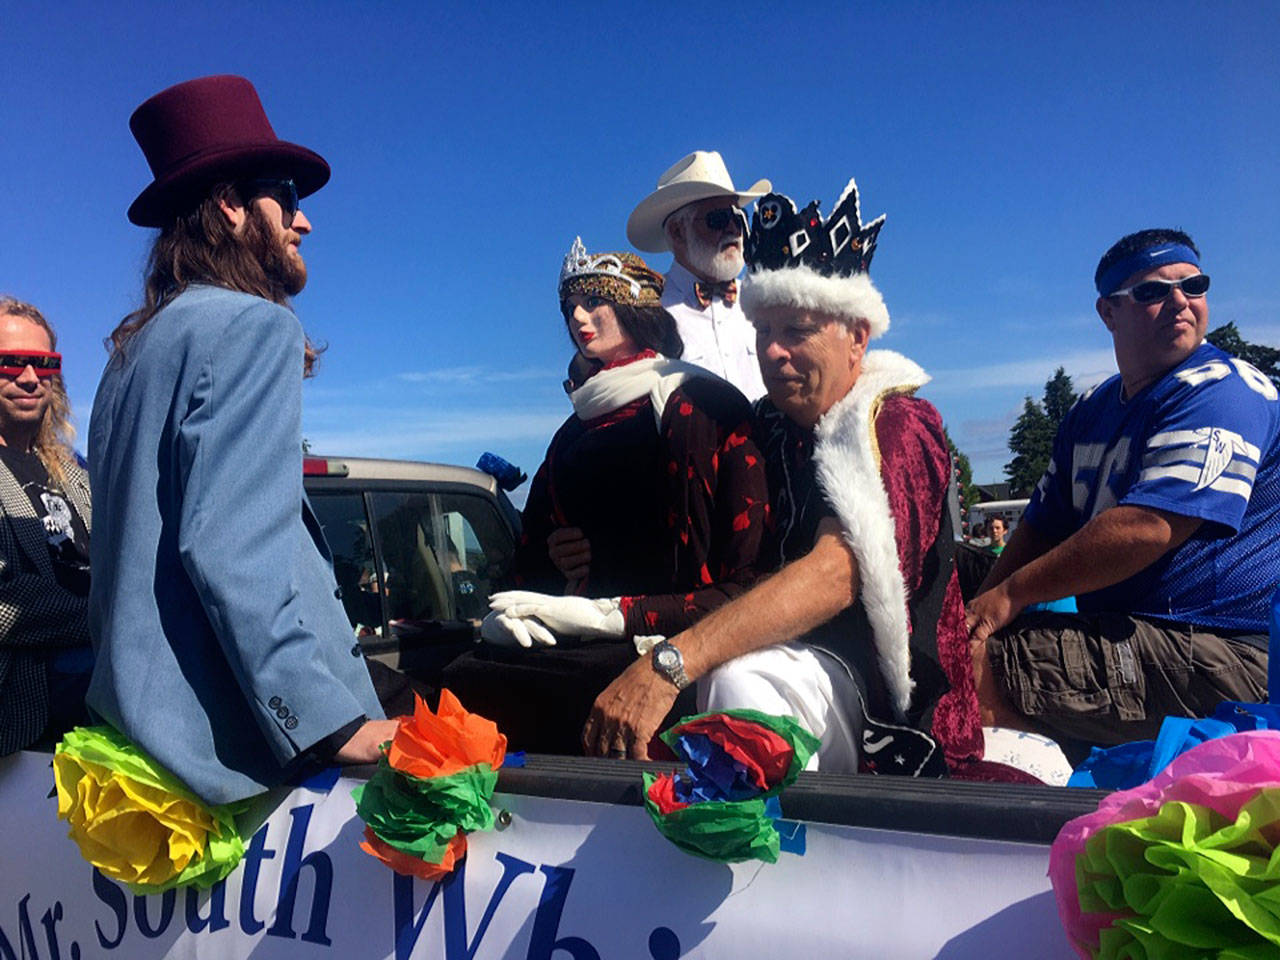 Mr. South Whidbey 2017, Daniel Goldsmith, takes a ceremonial ride with some of this year’s contestants during the Whidbey Island Fair parade. He’s surrounded by Tim Leonard, far left, Keegan Harshman, left, Ray Green, center, and Trace Prael, right. (Photo provided)